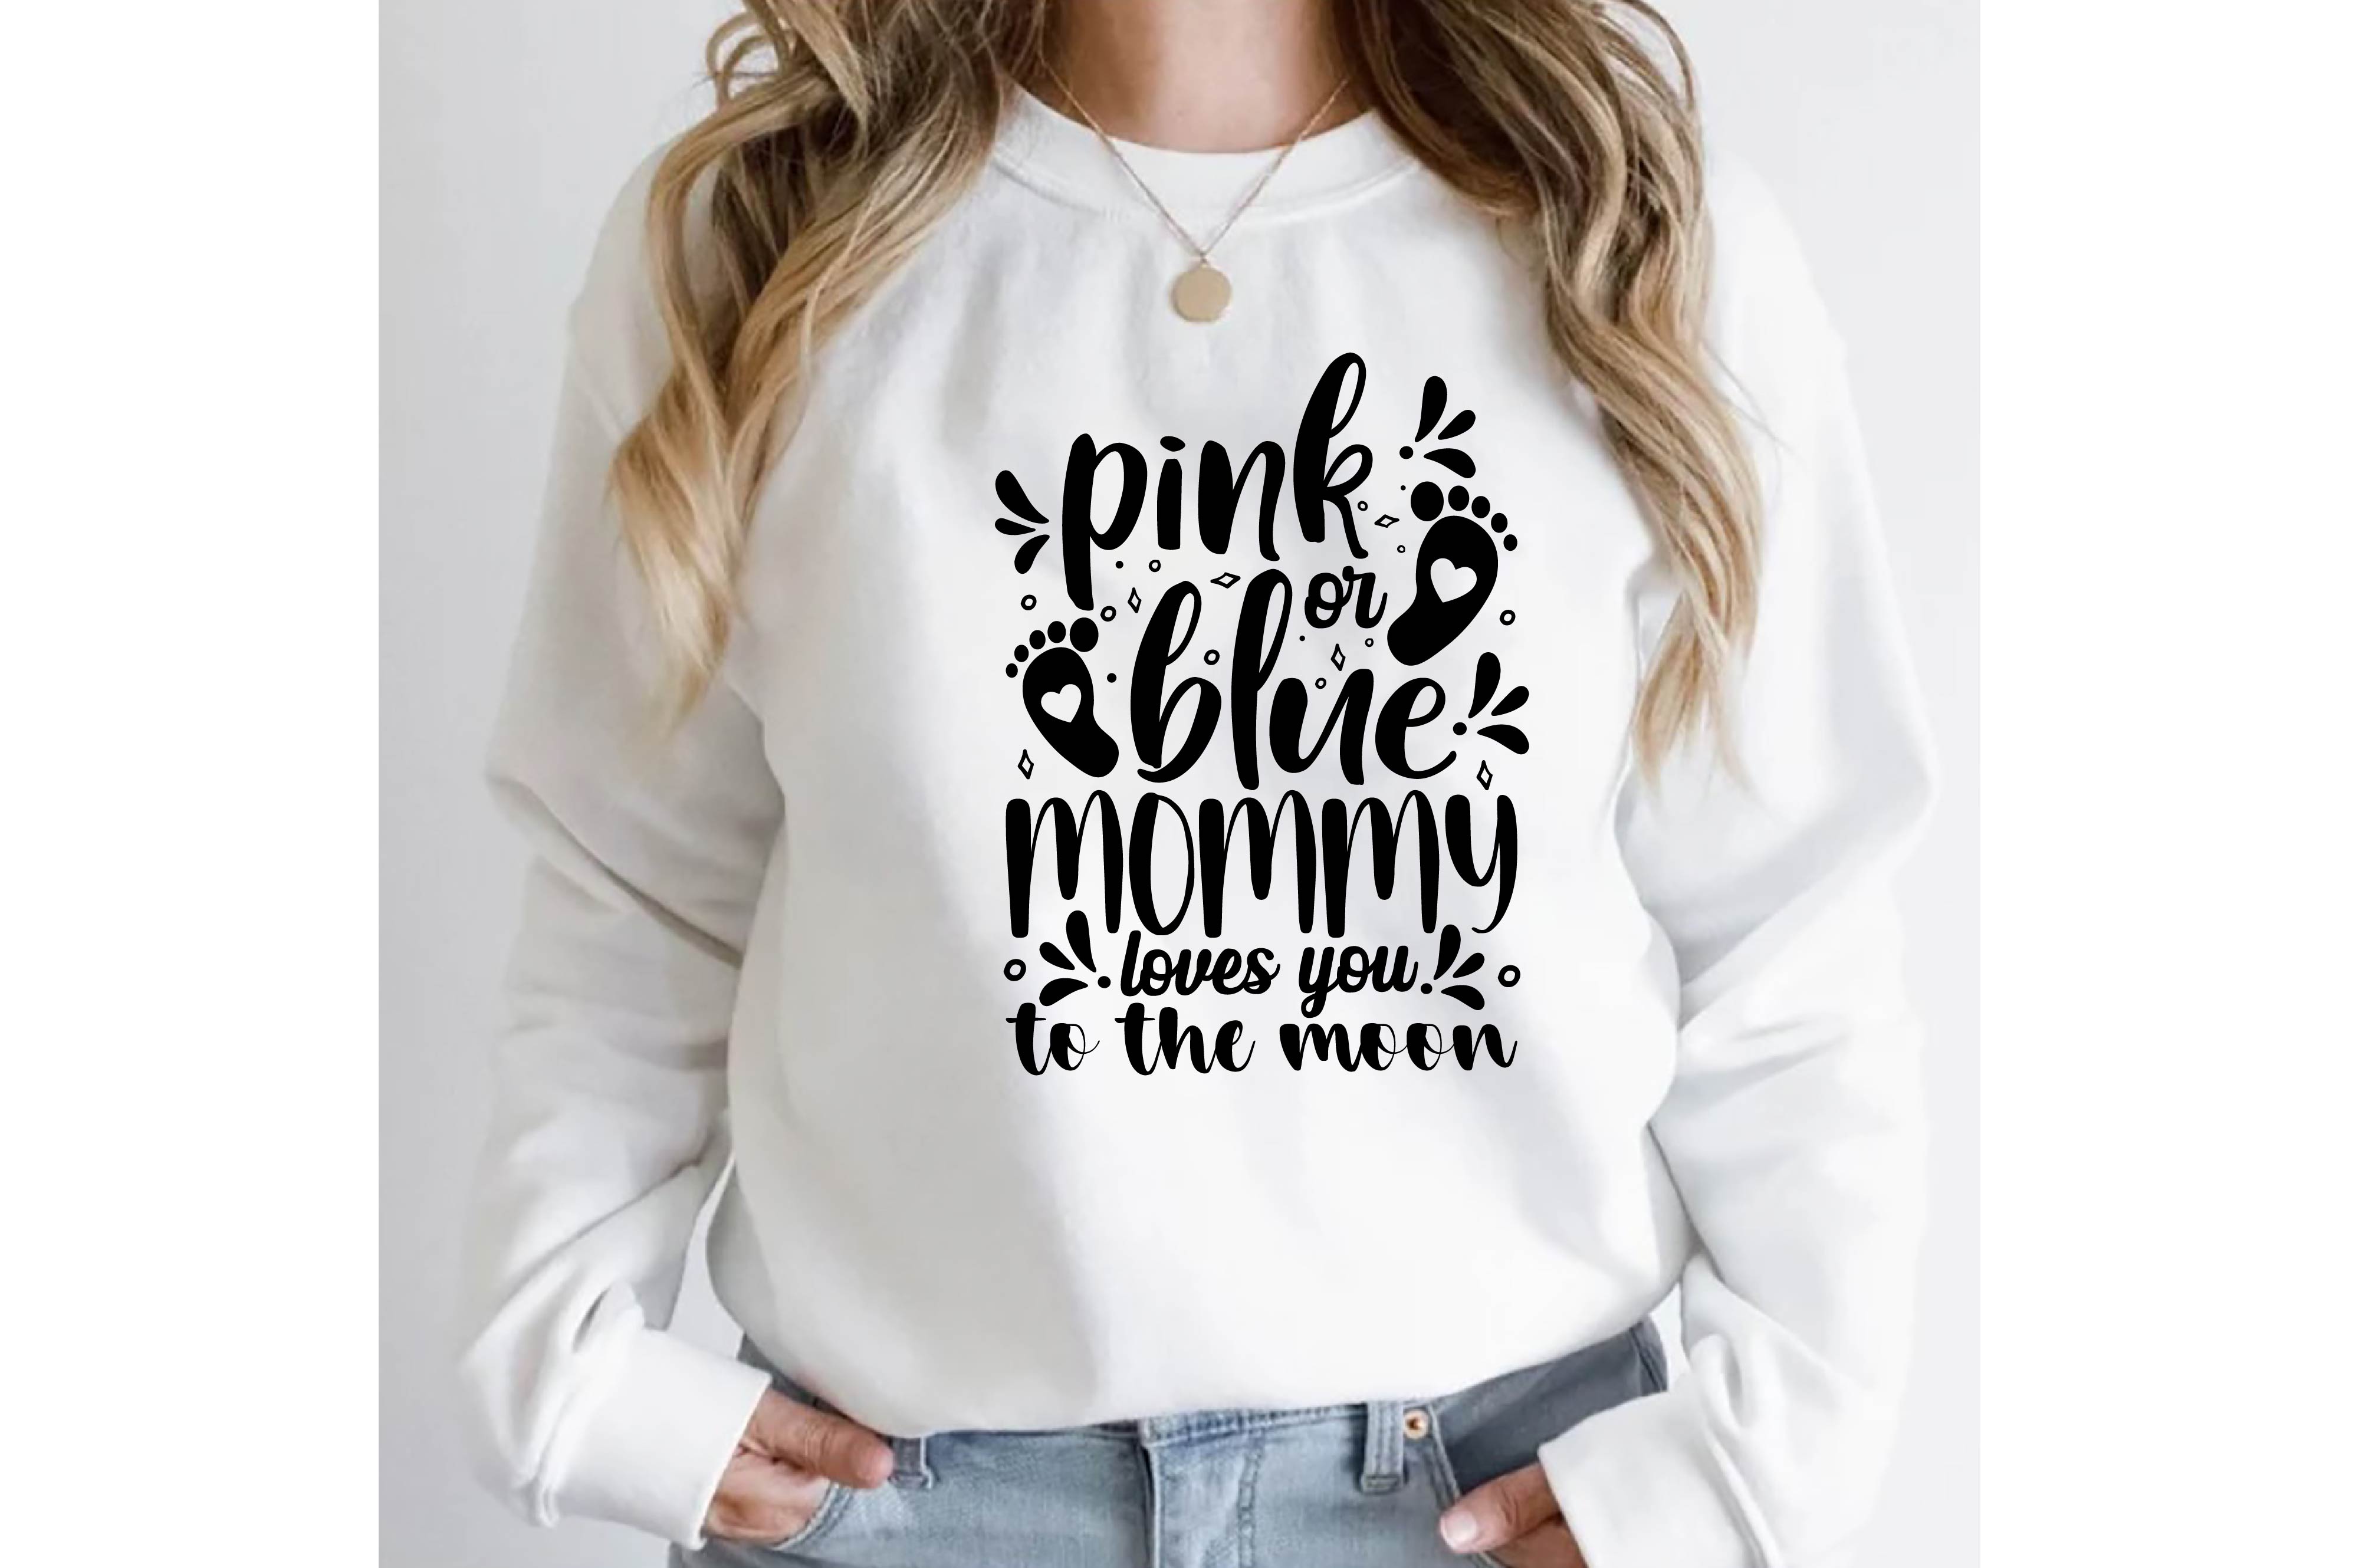 Woman wearing a white sweatshirt that says pink is the new black mommy.